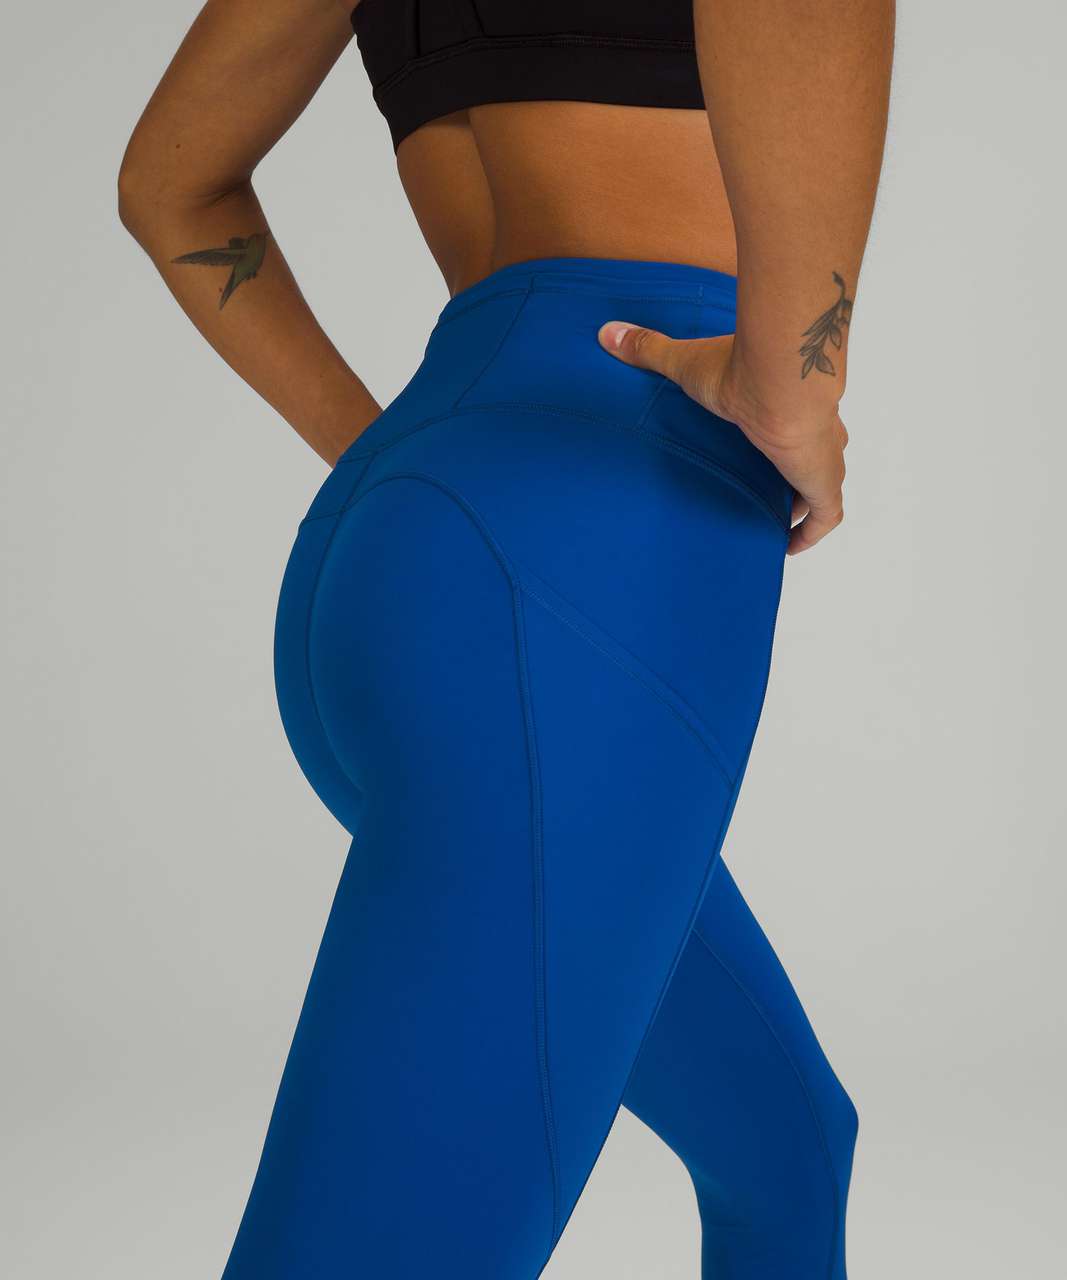 Lululemon Fast and Free High-Rise Crop 23" - Symphony Blue